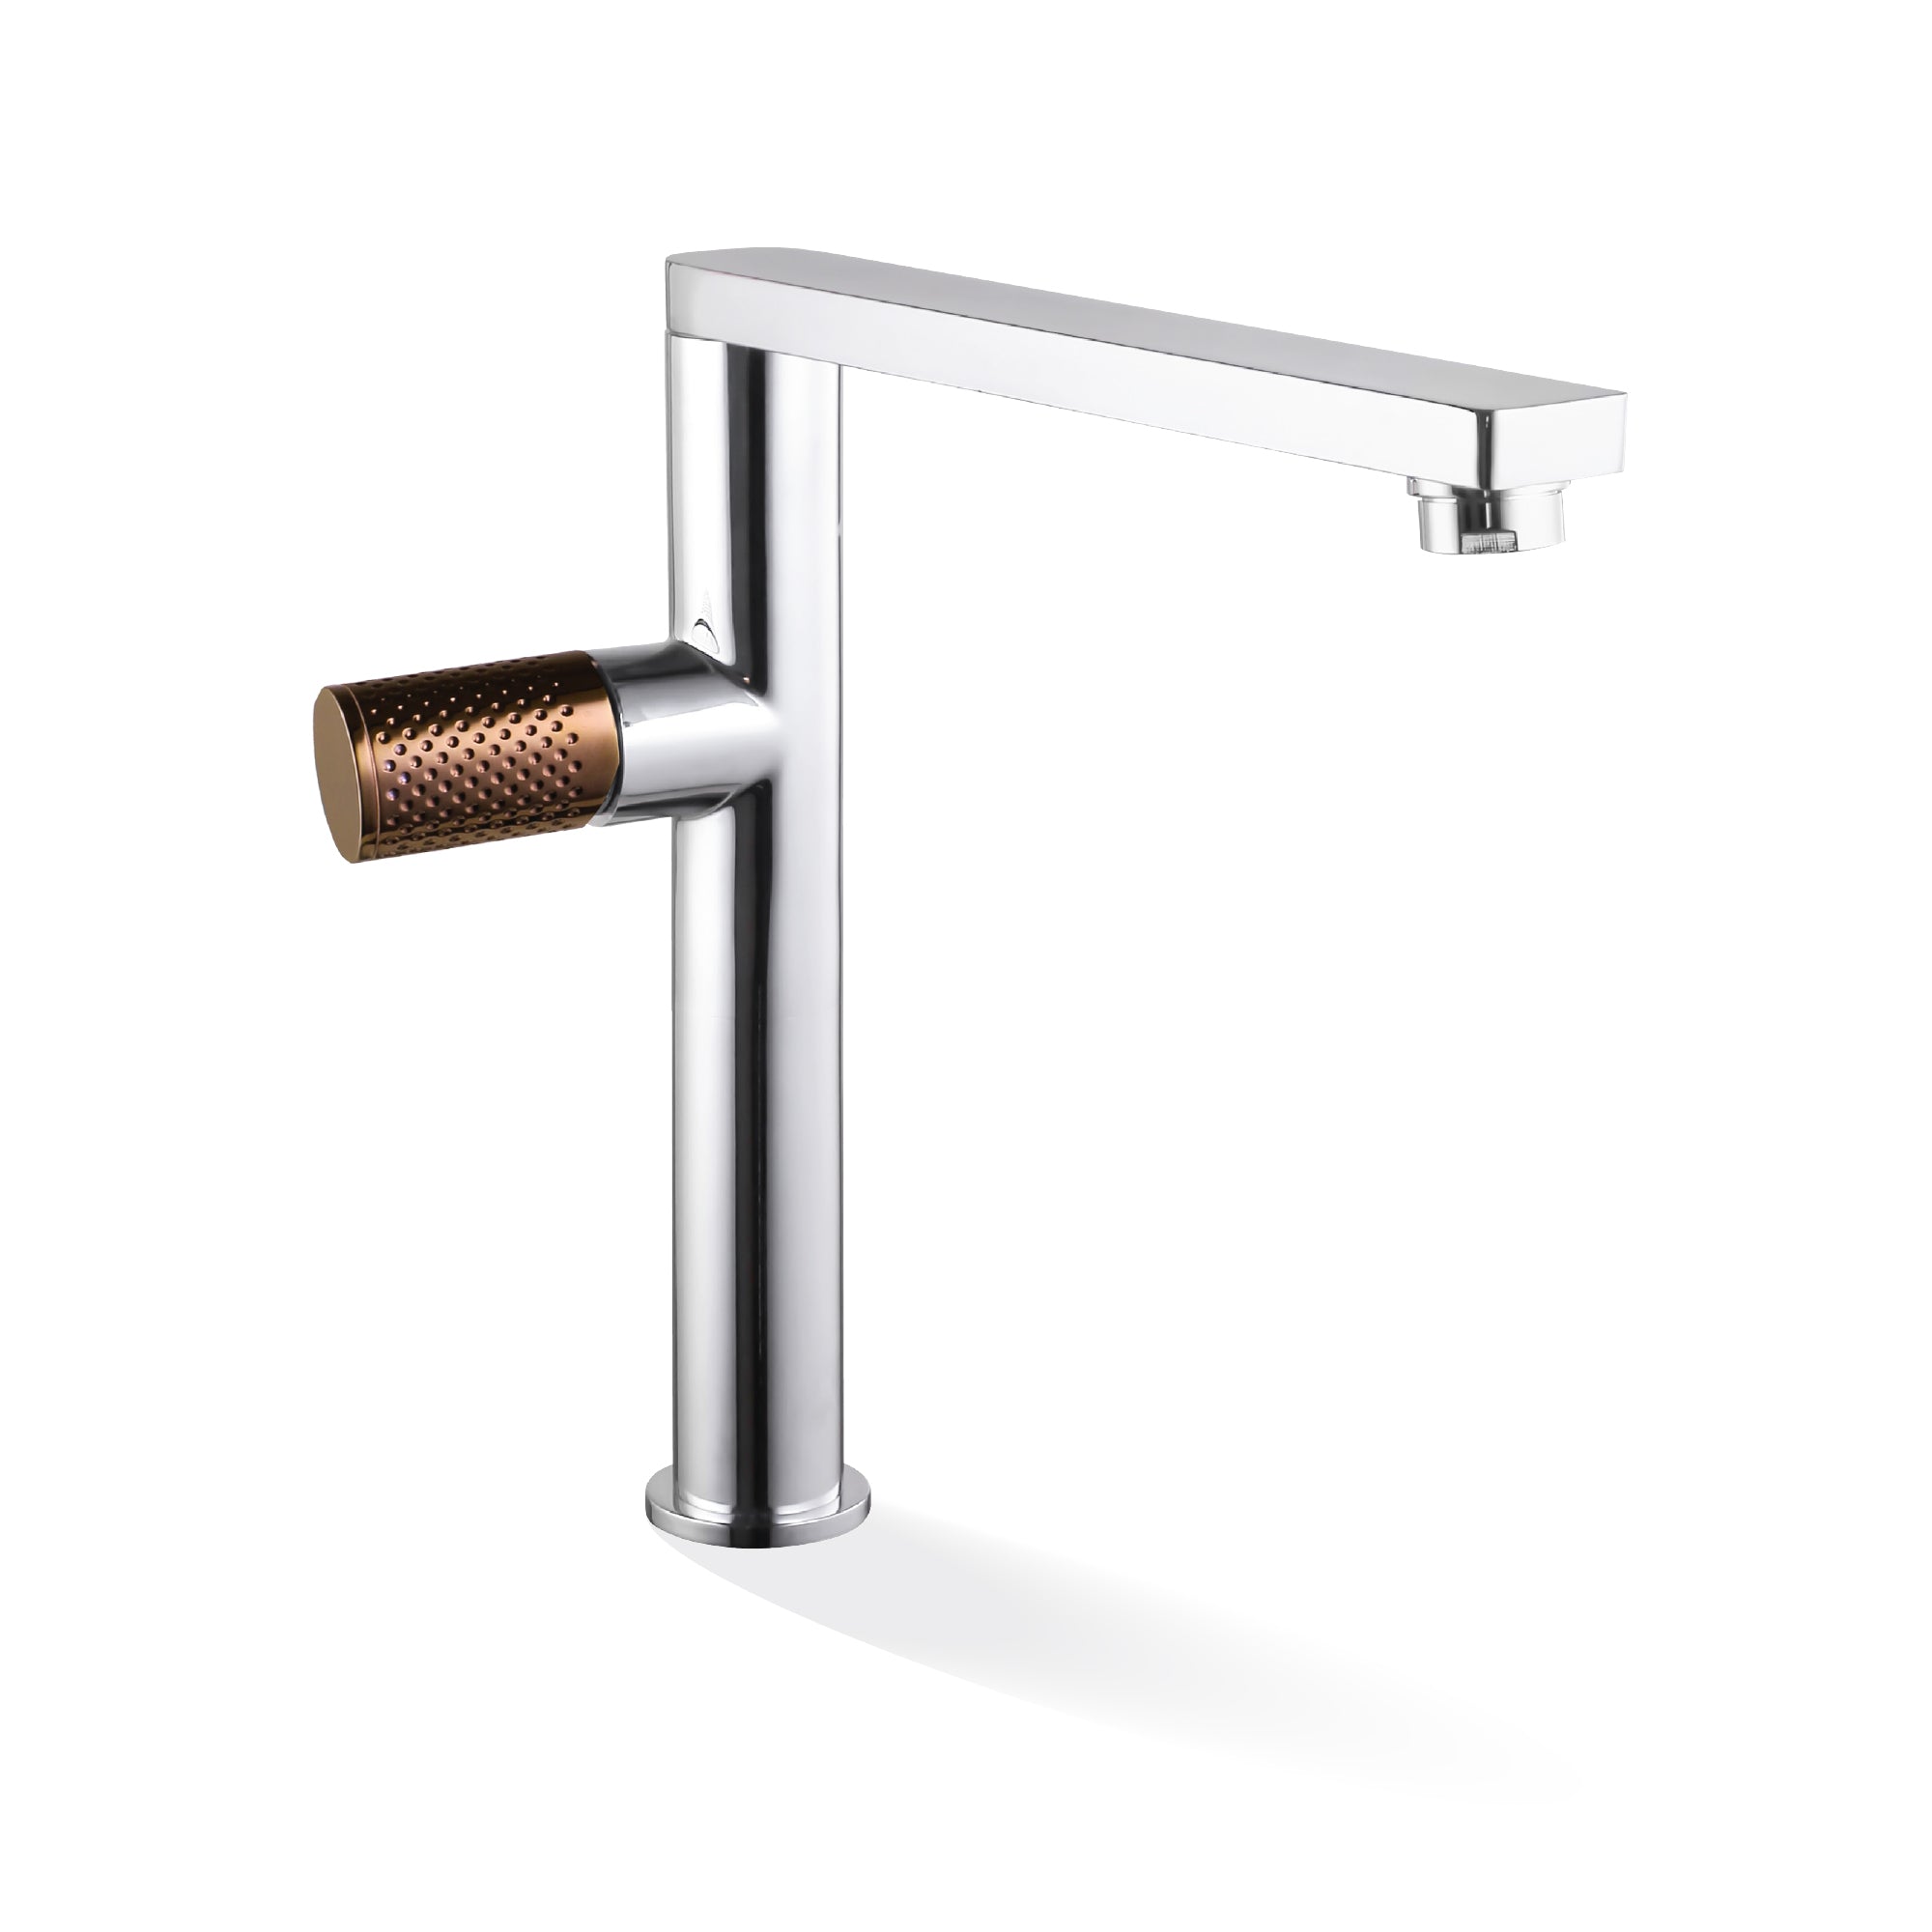 LINKWARE GABE SINK MIXER CHROME AND ROSE GOLD